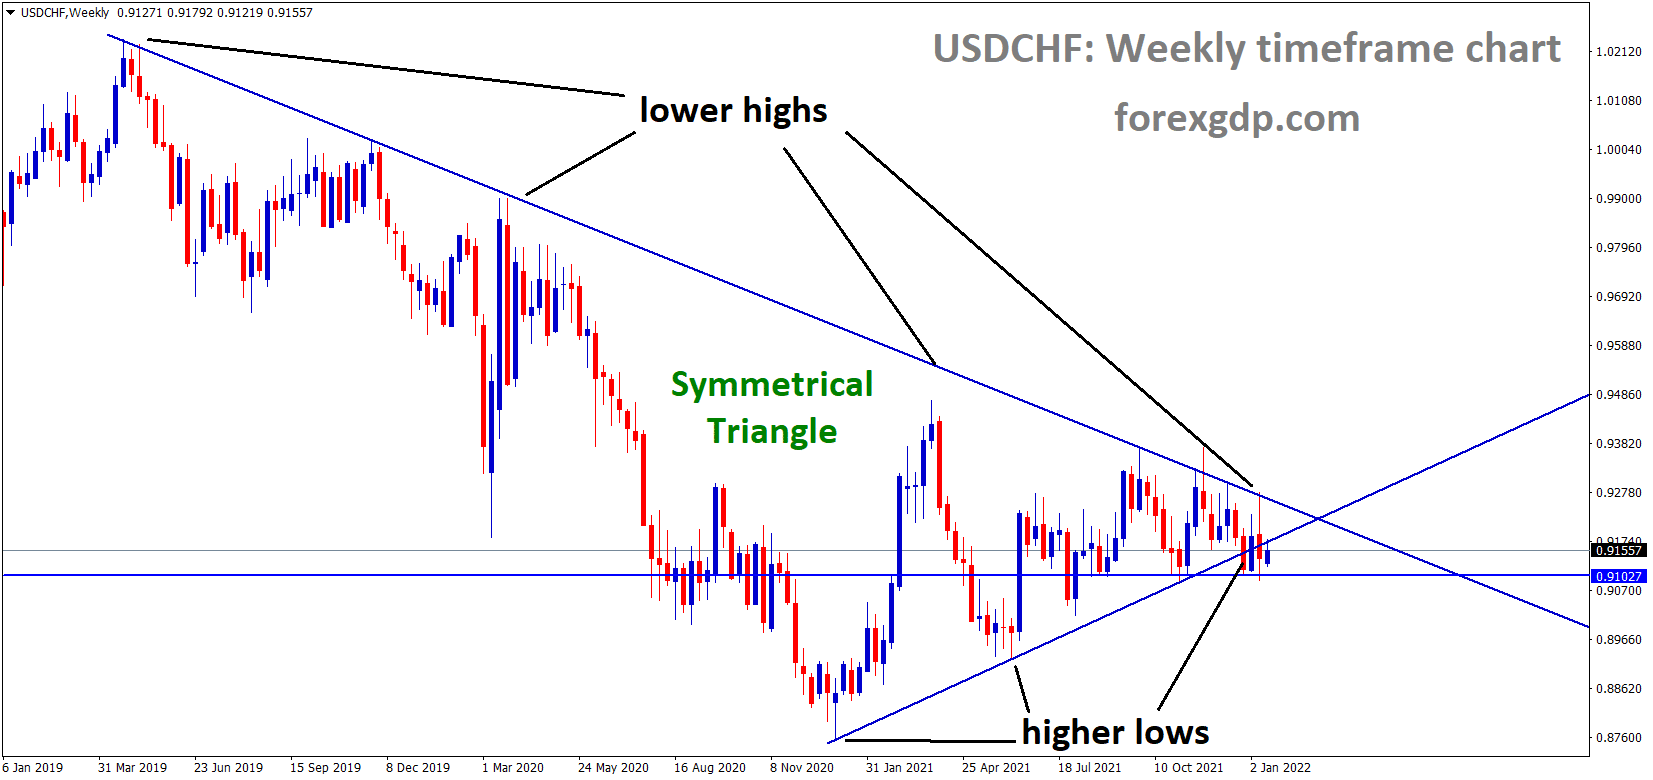 USDCHF is moving in a Symmetrical triangle pattern and the market consolidated at the higher low area of the triangle pattern